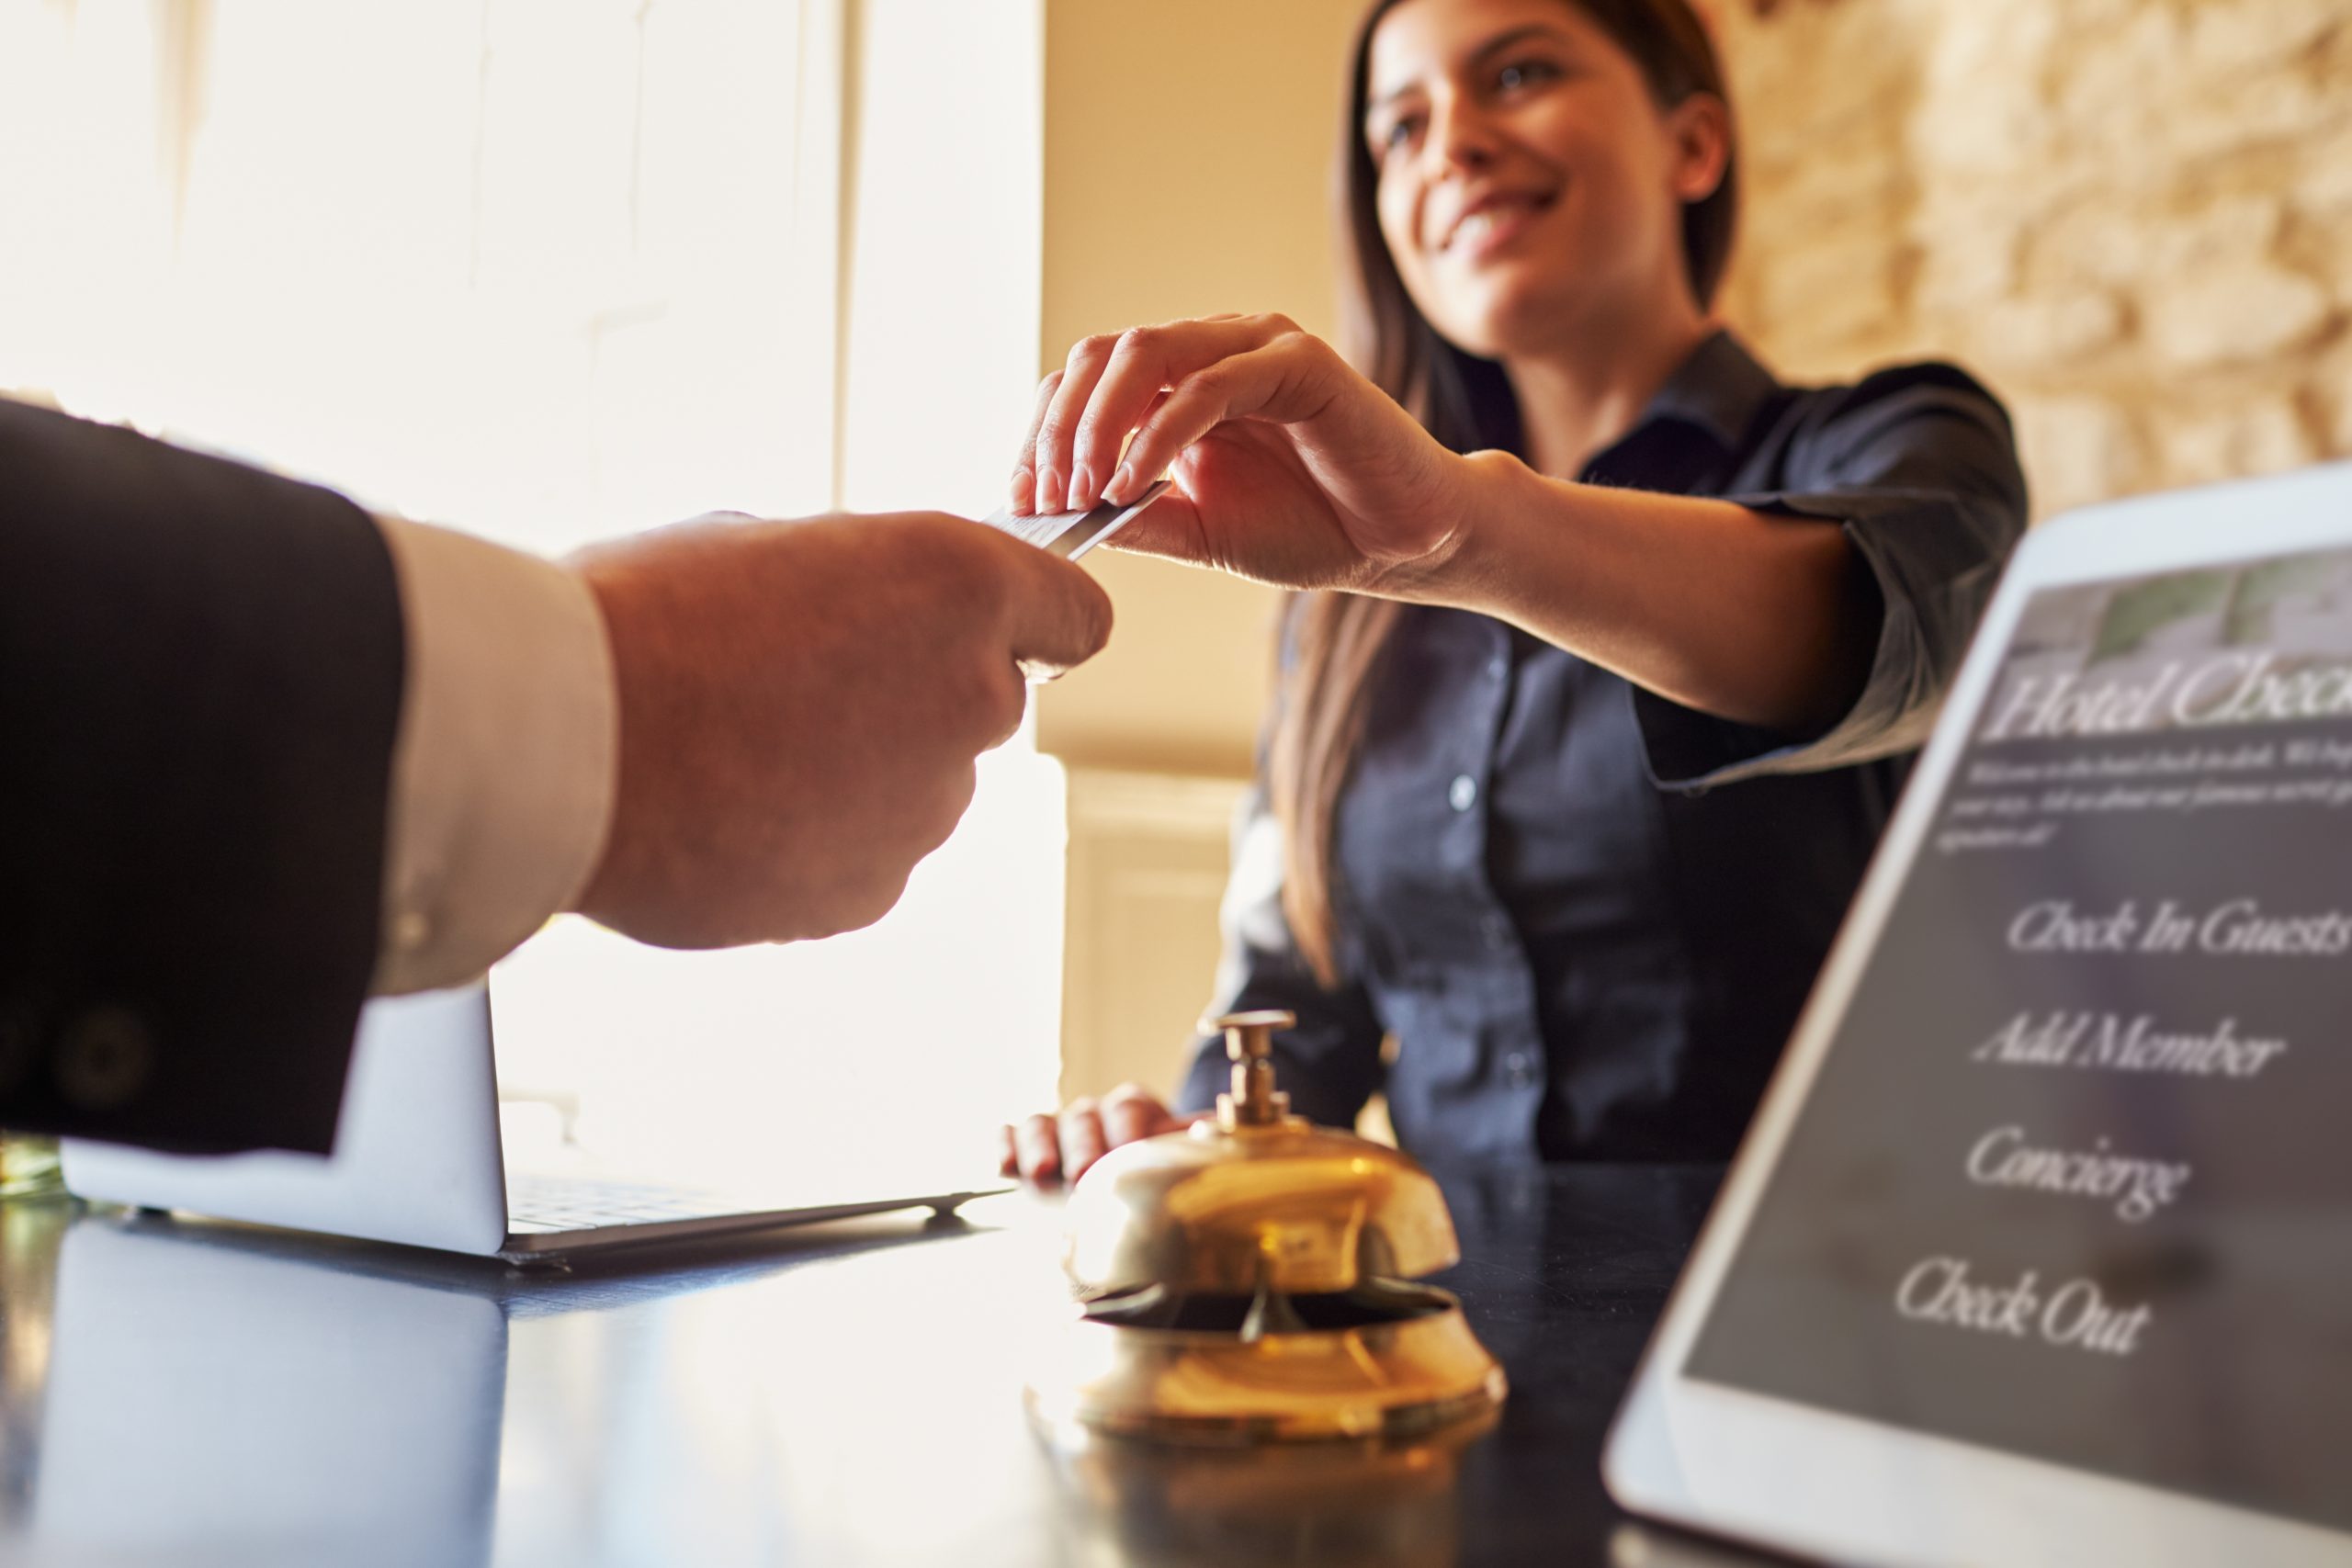 A concierge desk worker is handing a key card to a customer. There is a bell in the photo and a laptop and a sign telling guests to check in and out